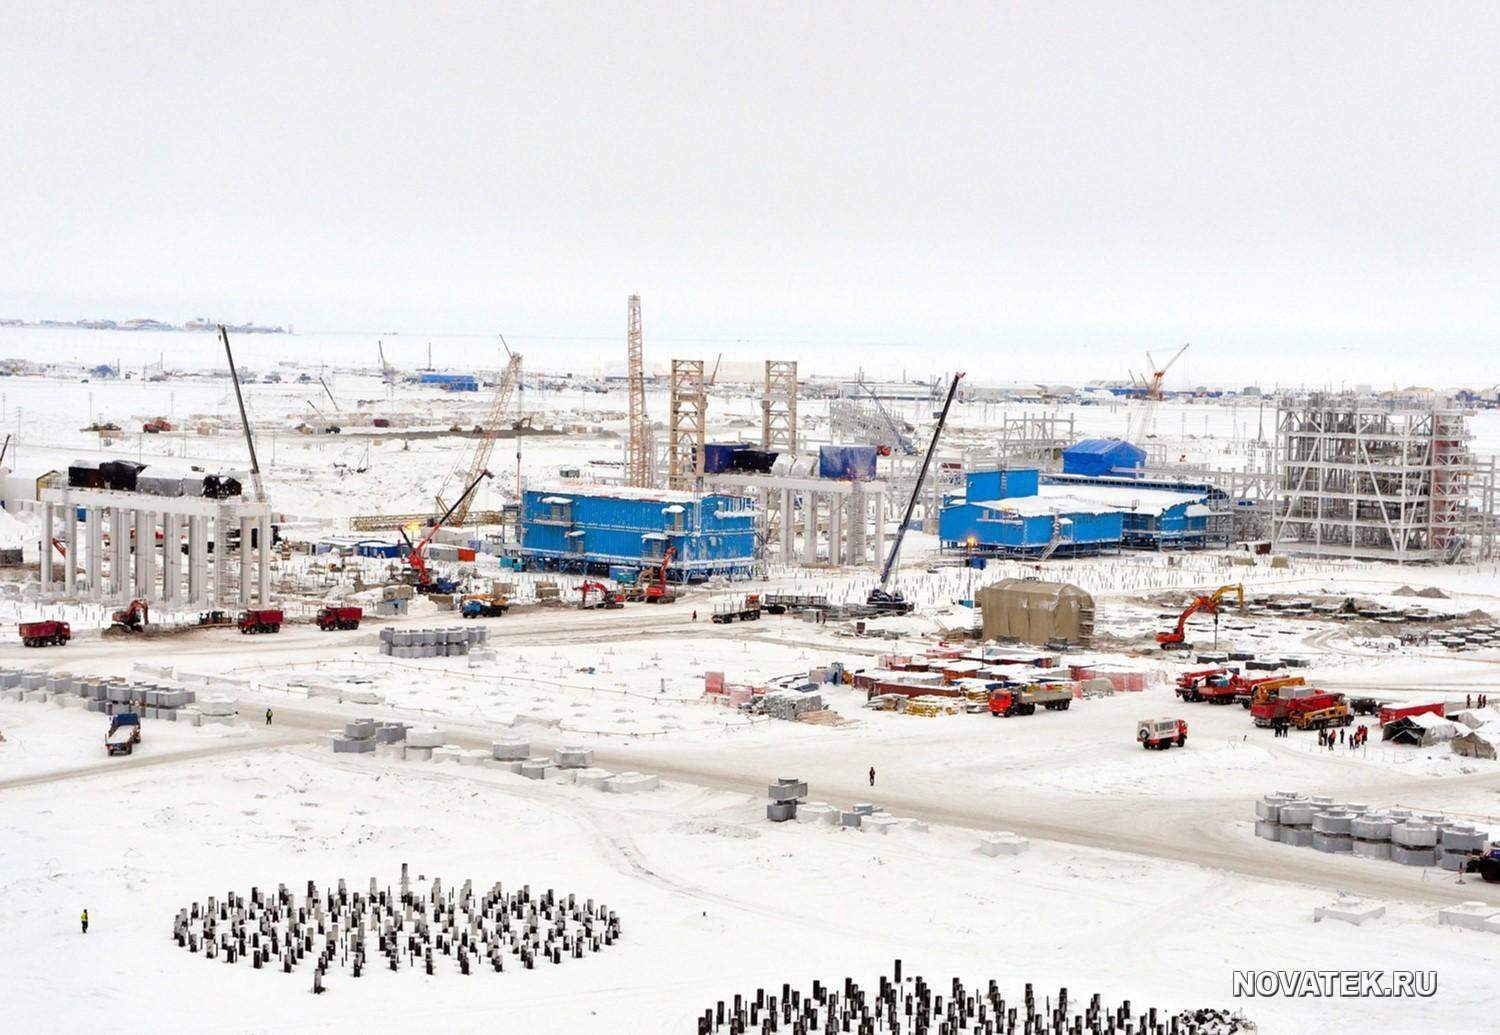 Russia’s Yamal LNG ships two million tons of LNG